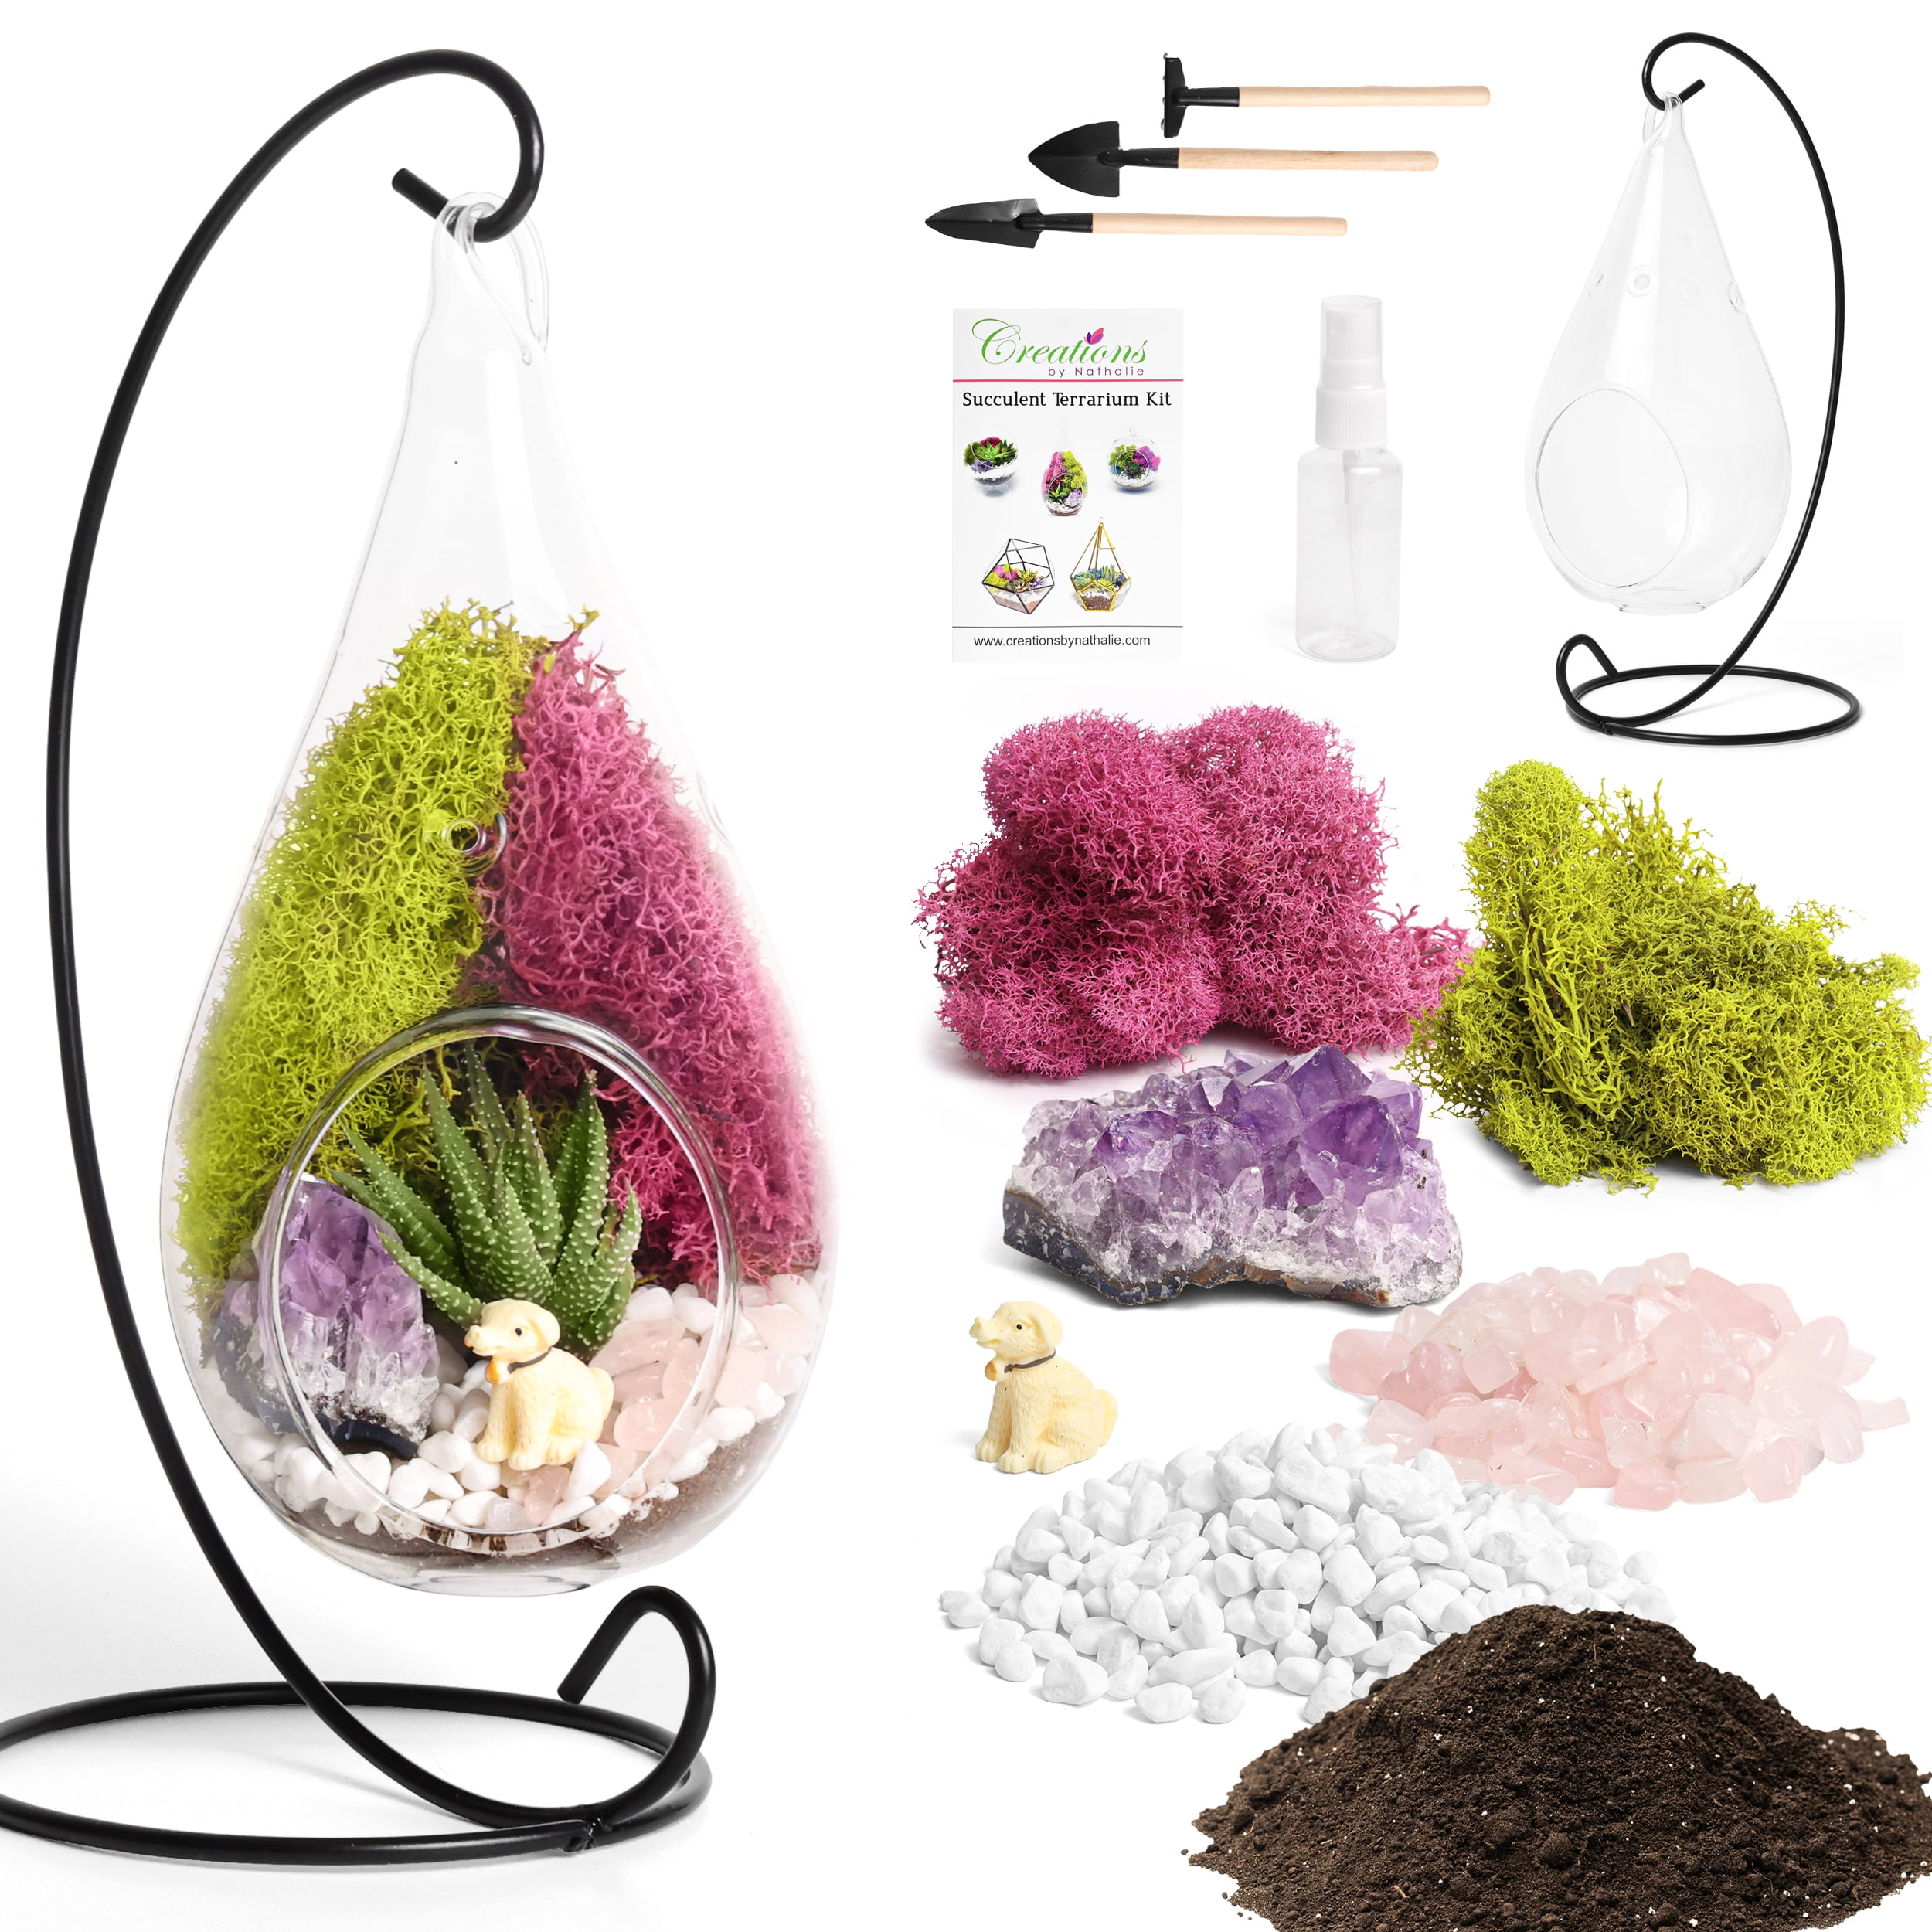 Start Your Terrarium Project with Ease: Eco-Glass Terrarium Kits and Expert  Advice